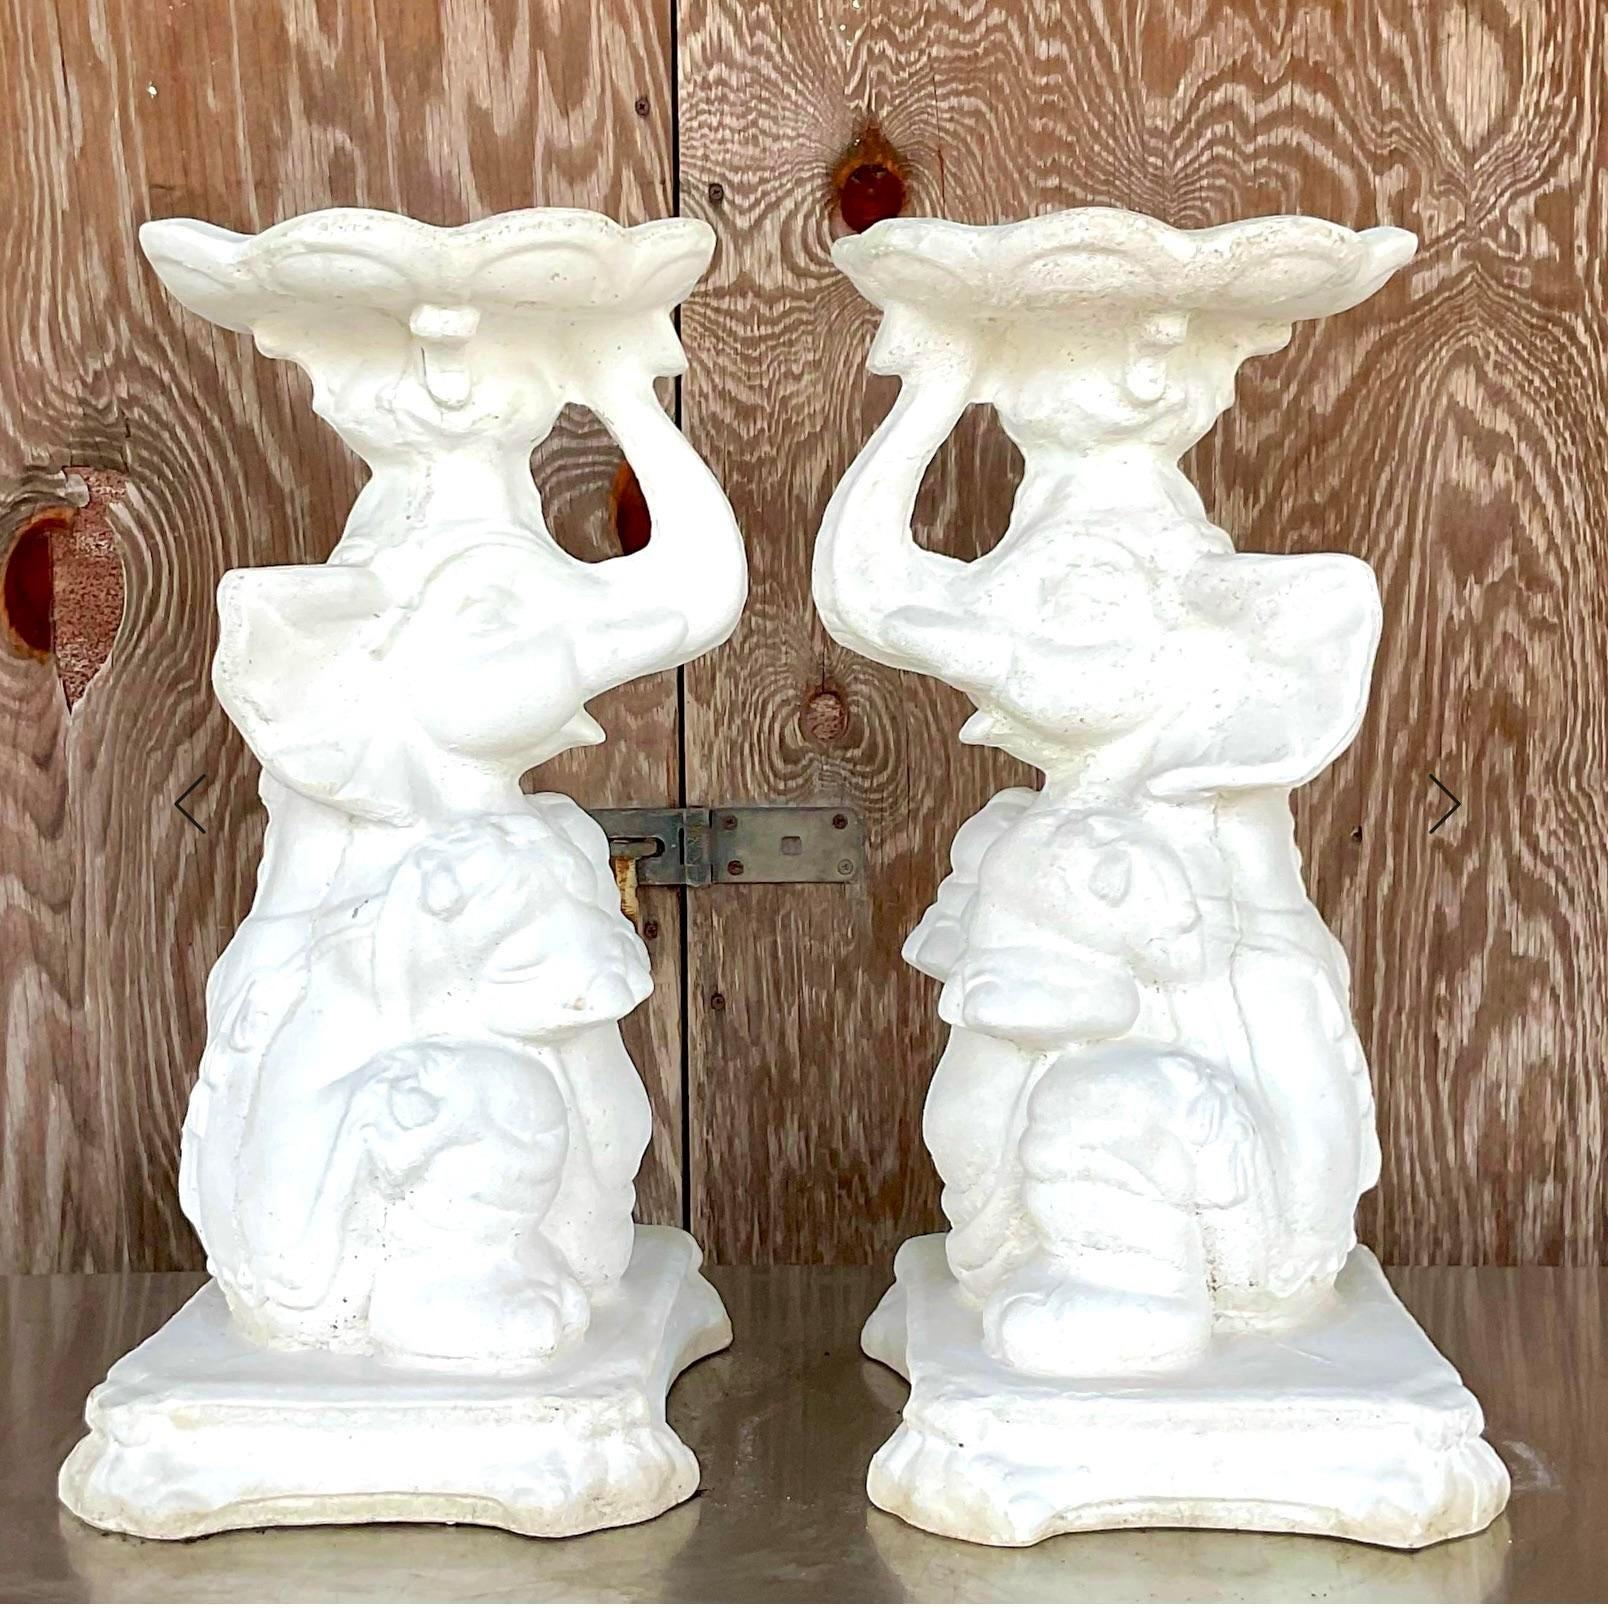 A fabulous pair of vintage Boho elephants. Solid cement forms with a plaster white finish. Perfect indoors or outside. Just add glass and make them tables. Acquired from a Palm Beach estate.